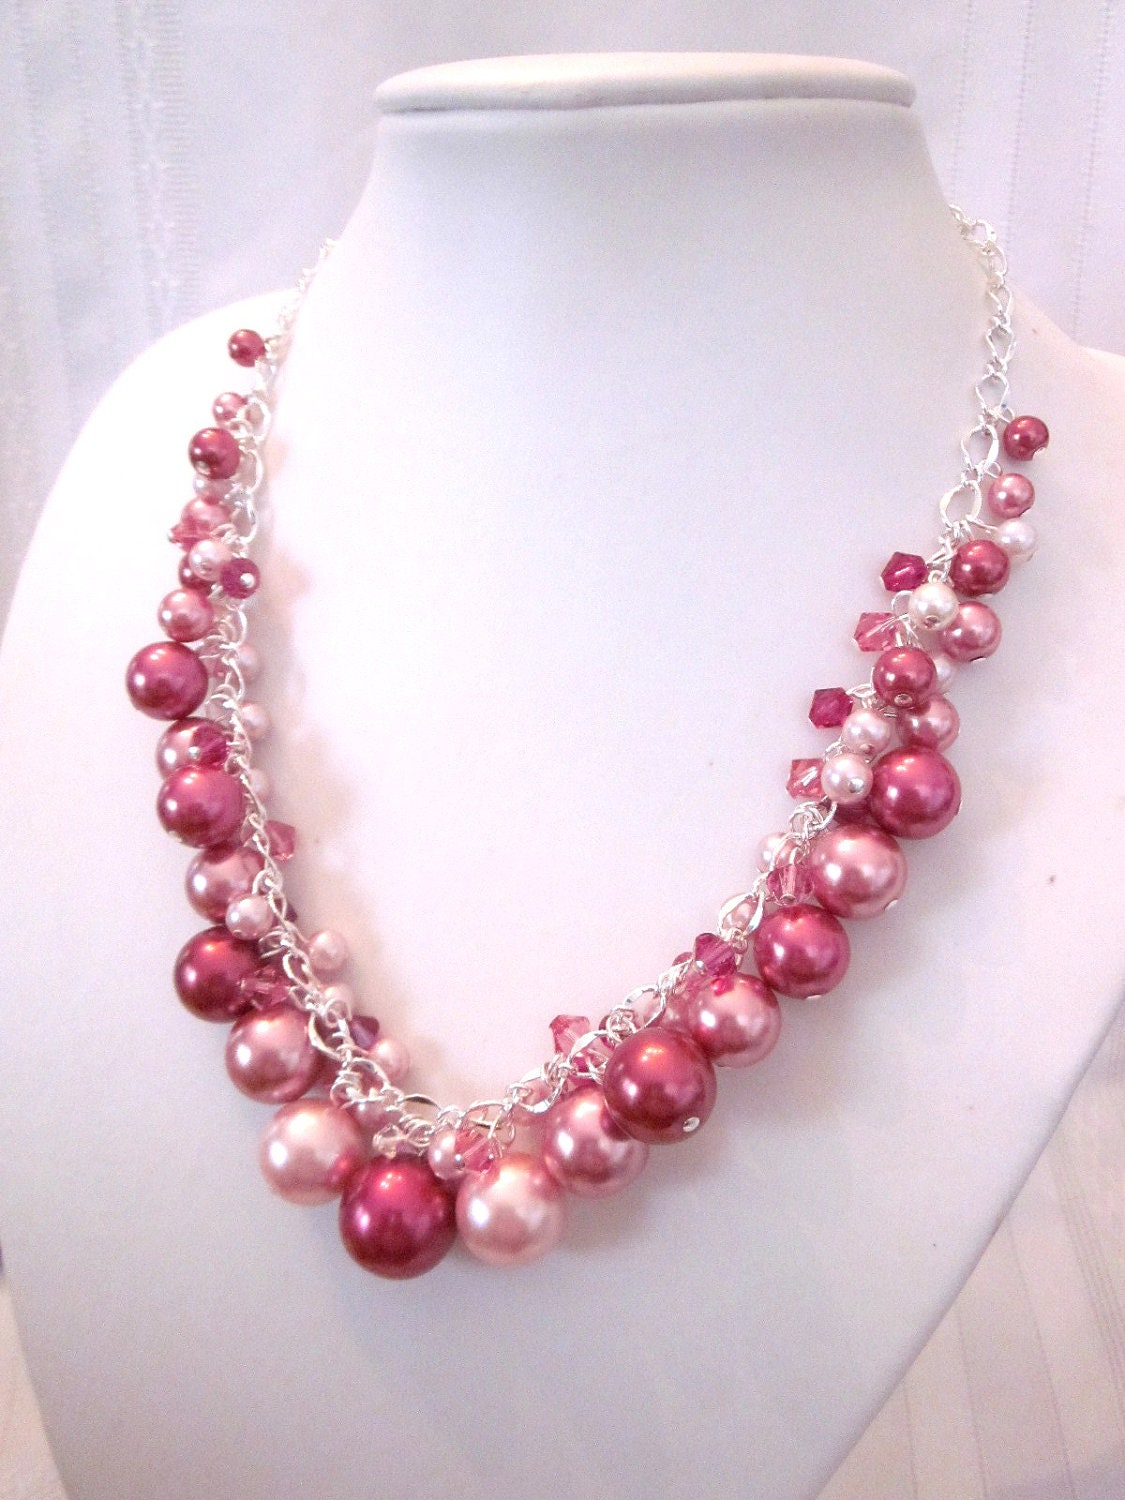 Shades of Rose Pearl and Crystal Cluster Necklace - Chunky, Choker, Bib, Necklace, Wedding, Bridal, Bridesmaid - CreationsbyCynthia1